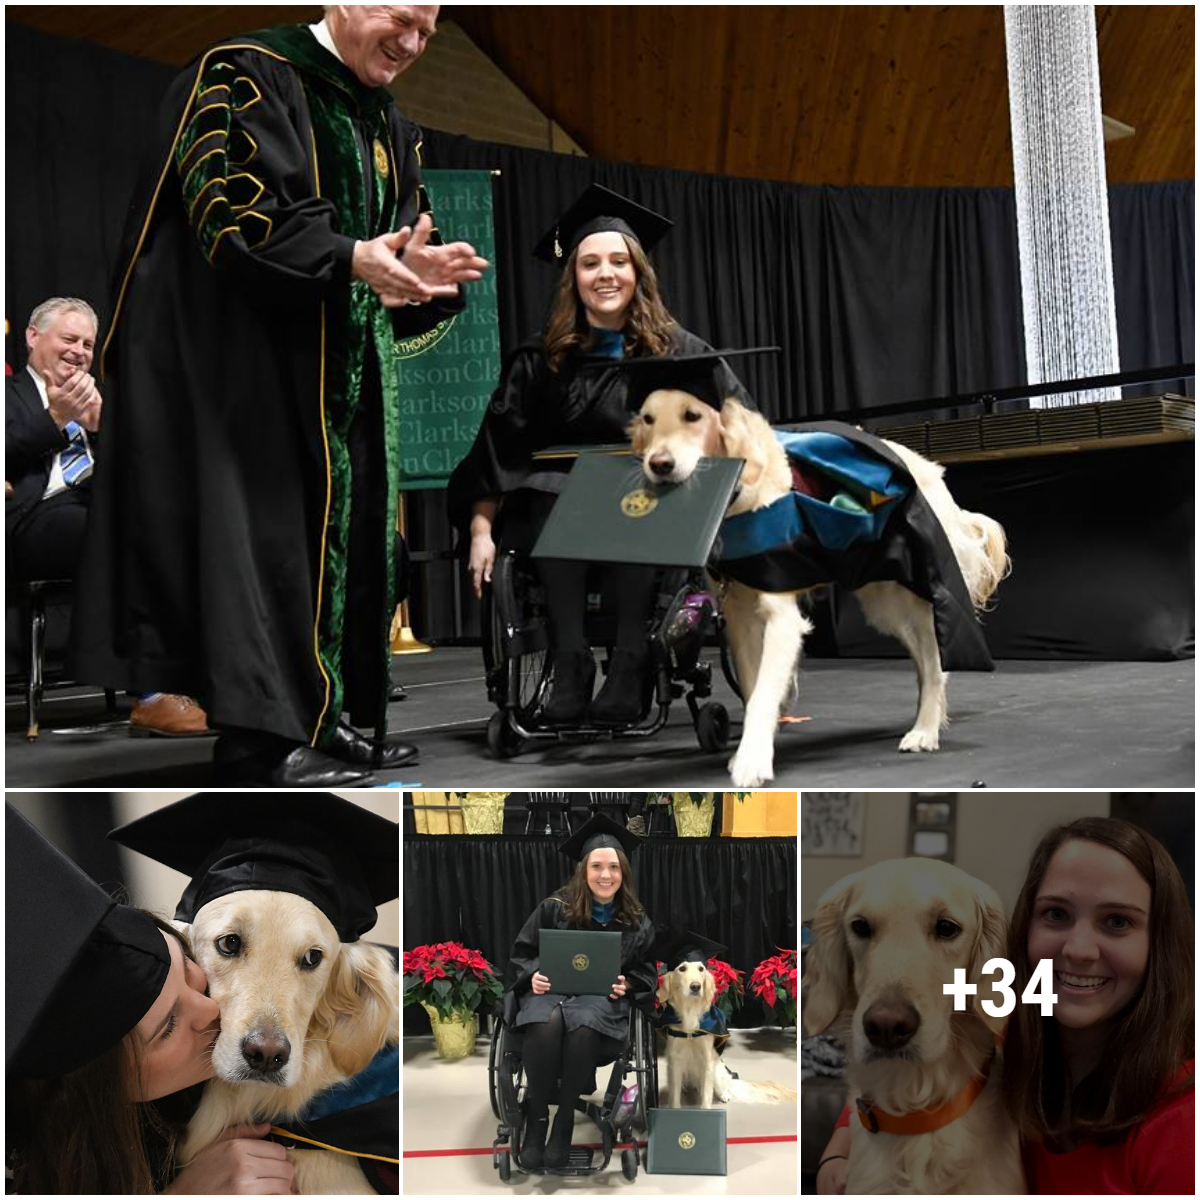 Honorary degree awarded to a female student for her devoted service dog